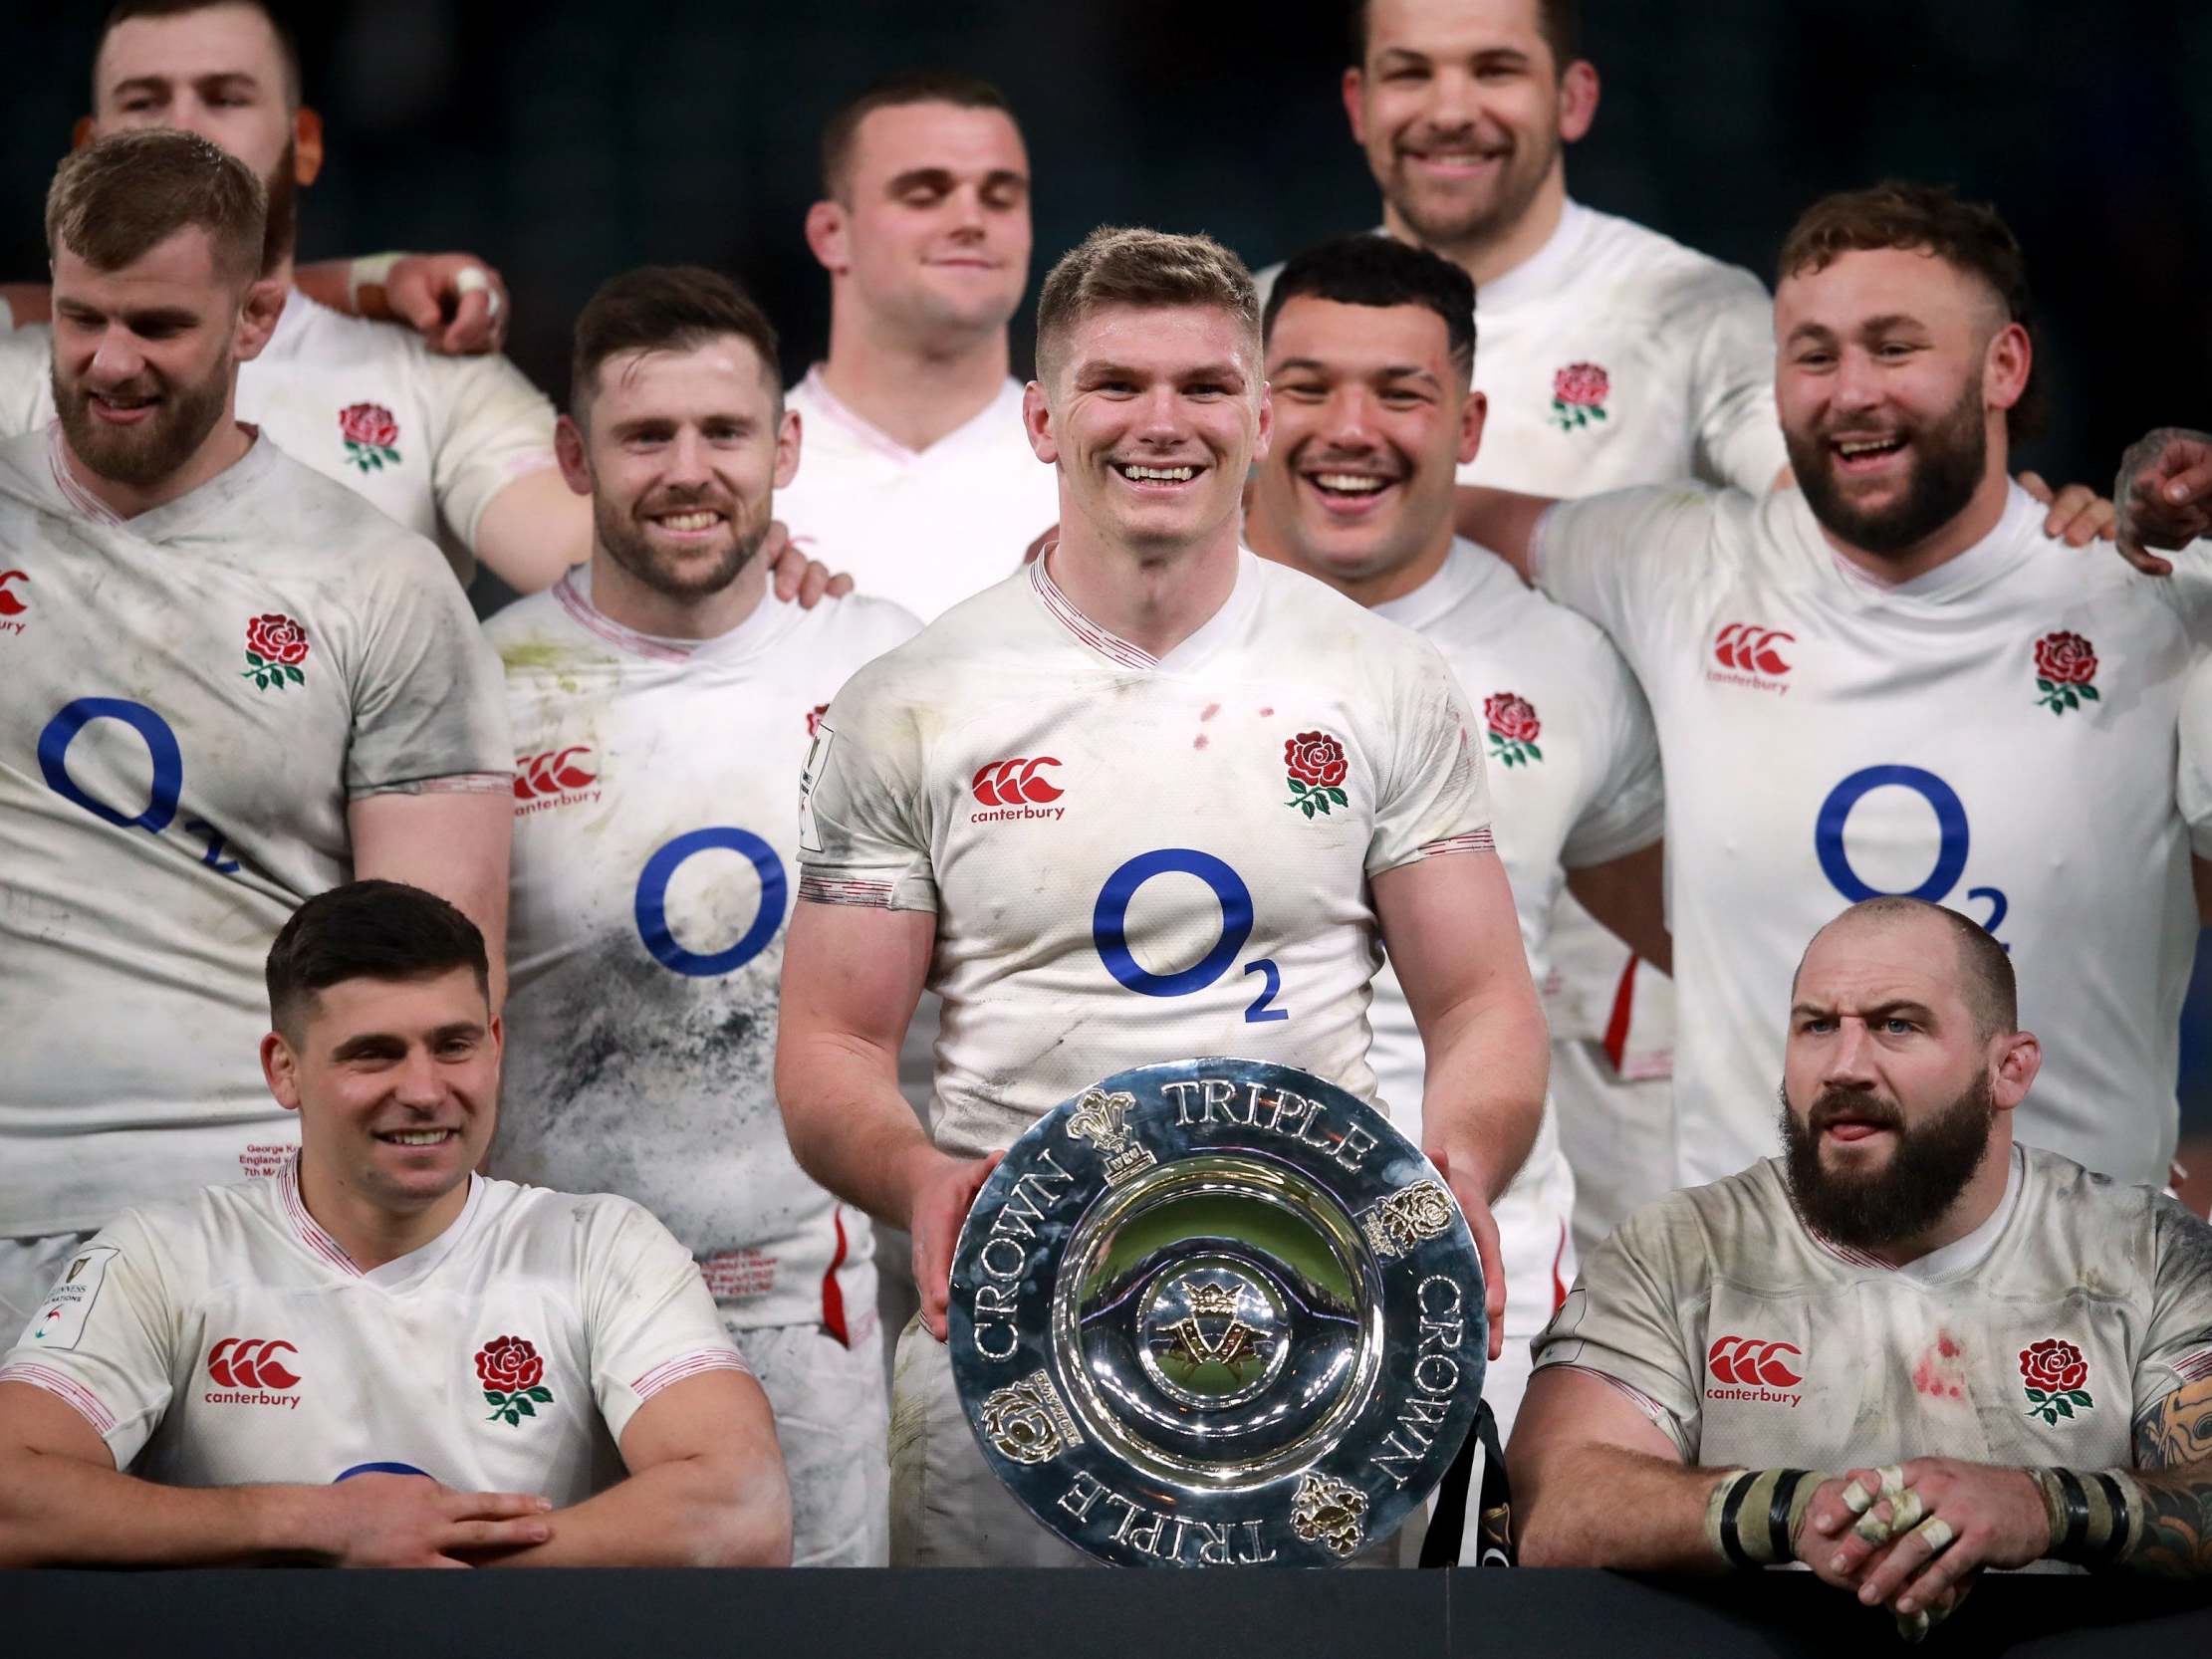 Swing Low has been a popular song among England rugby fans for at least three decades